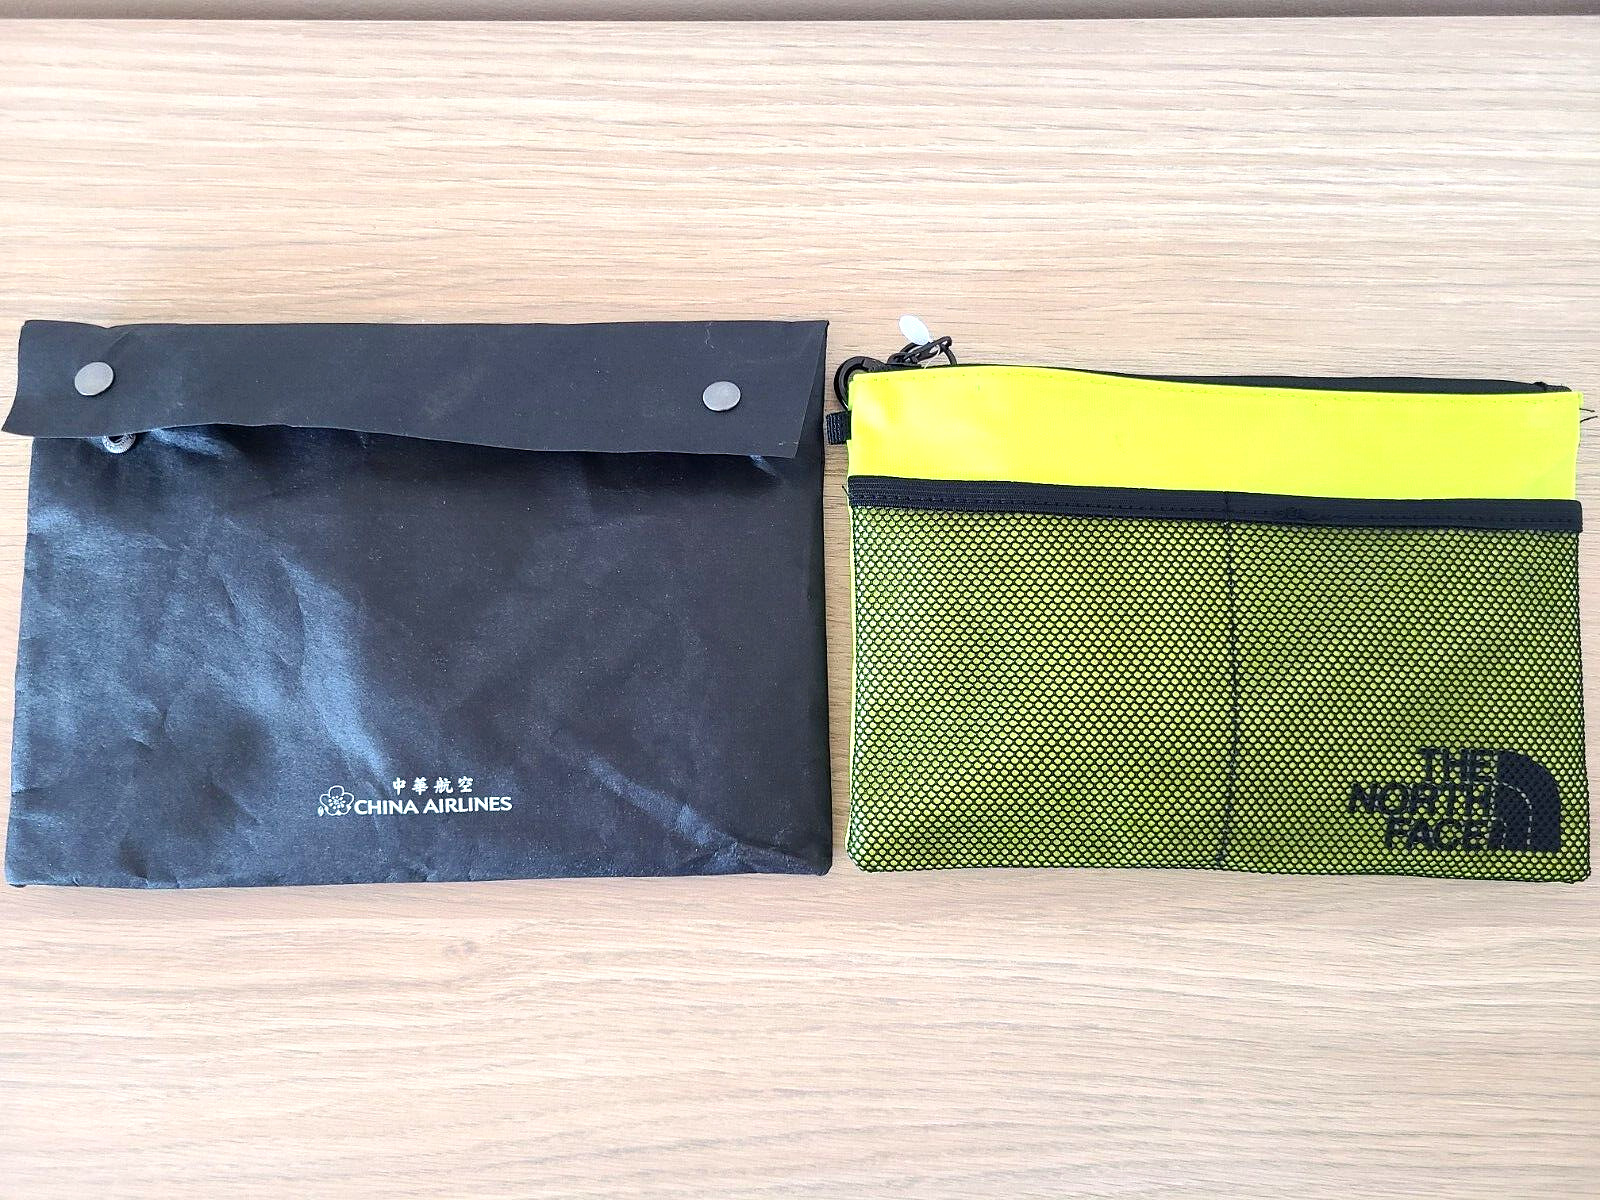 The North Face for China Airlines Business Class Amenity Kit